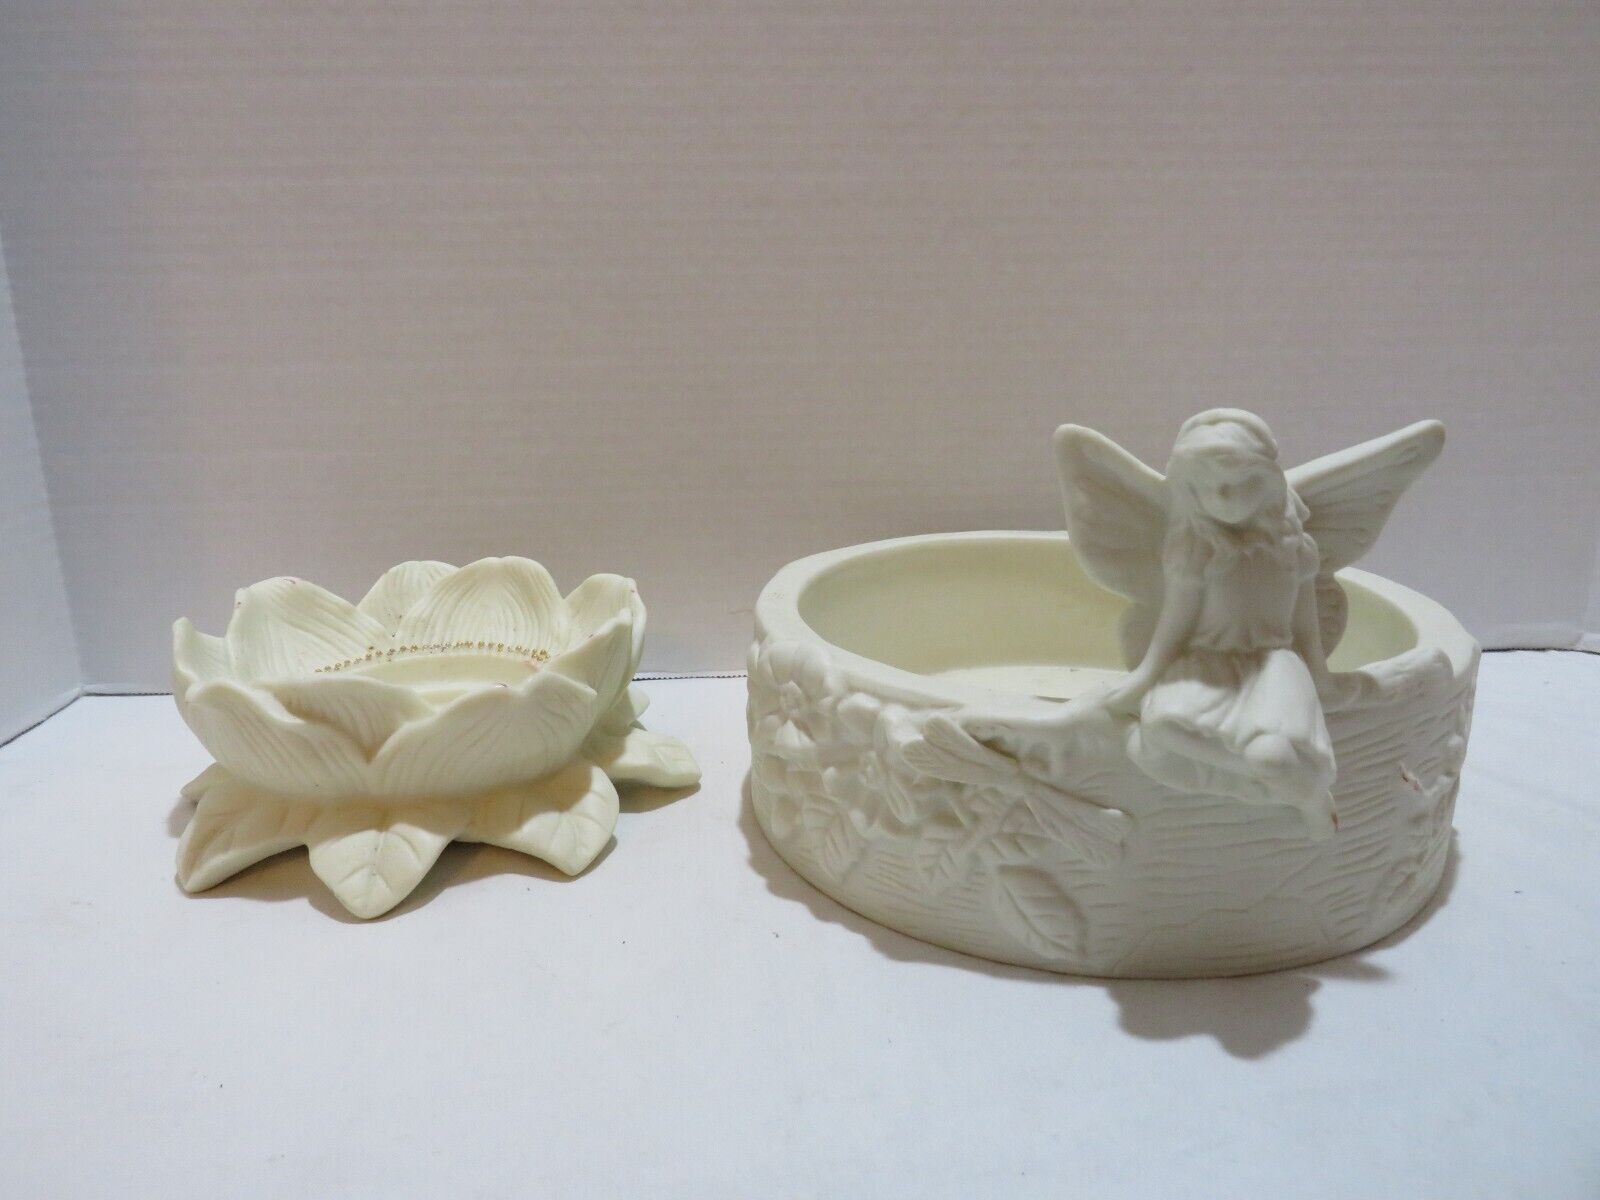 VTG PARTYLITE CANDLE HOLDERS FLOWER AND FAIRY/ANGEL DESIGN